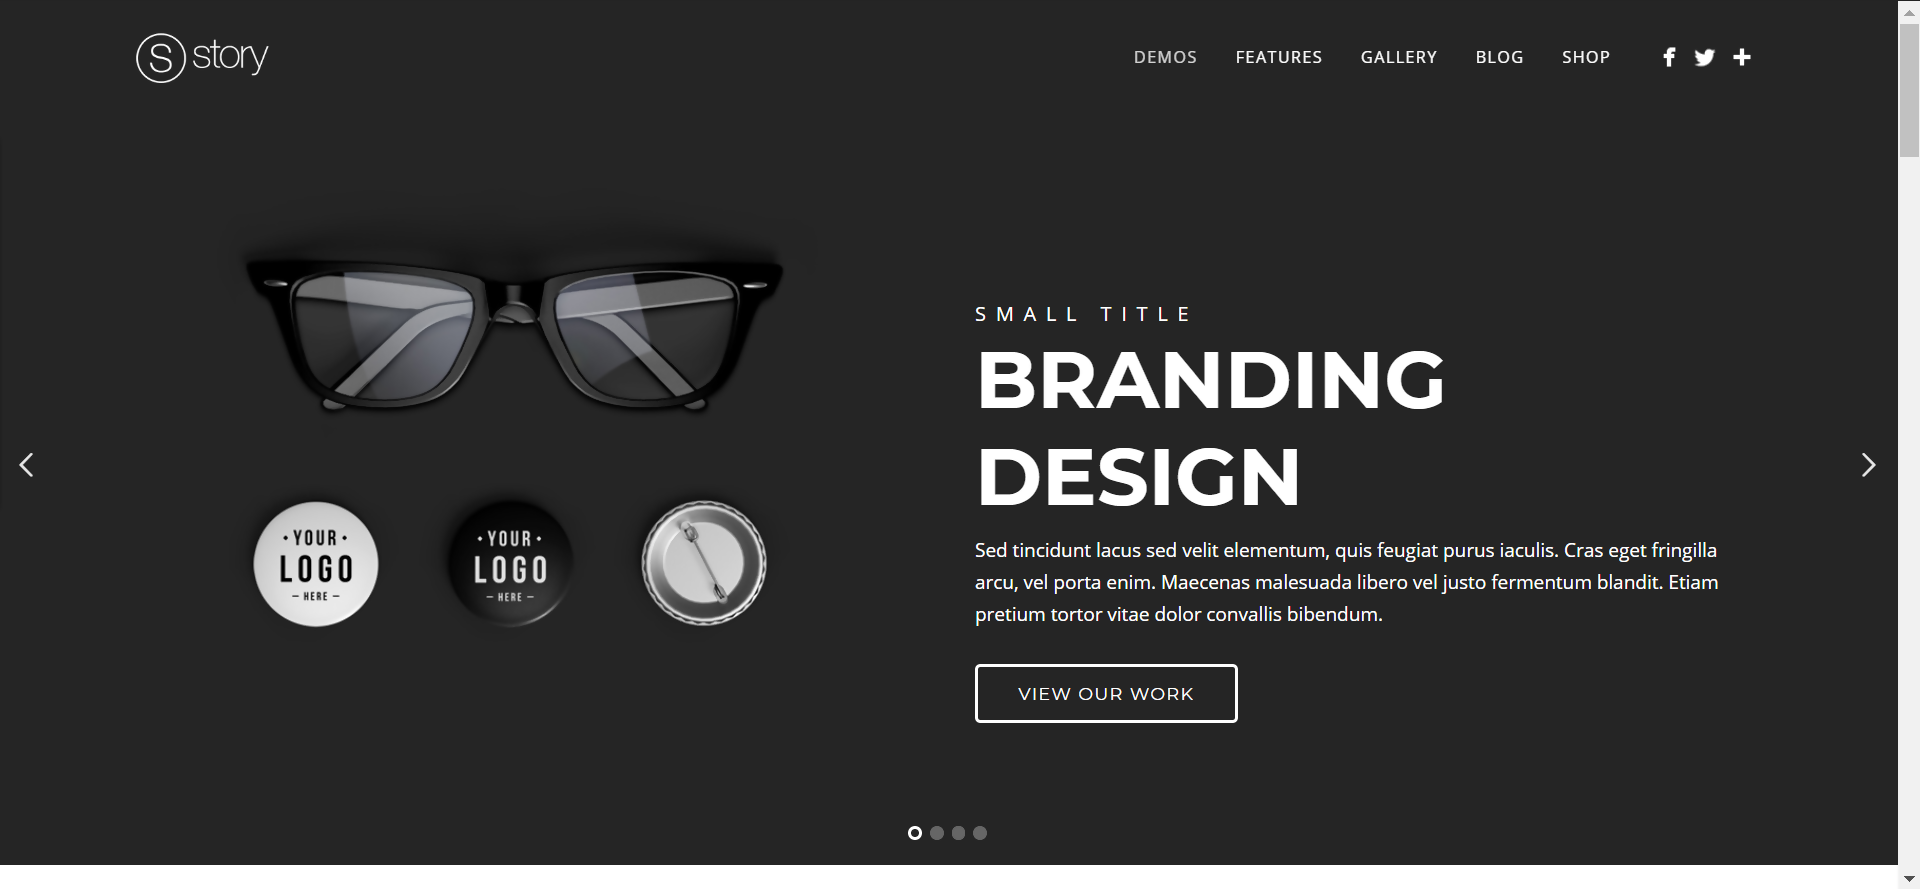 Flat Design for Your WordPress Site: What Is It + 4 WordPress Flat Design Themes